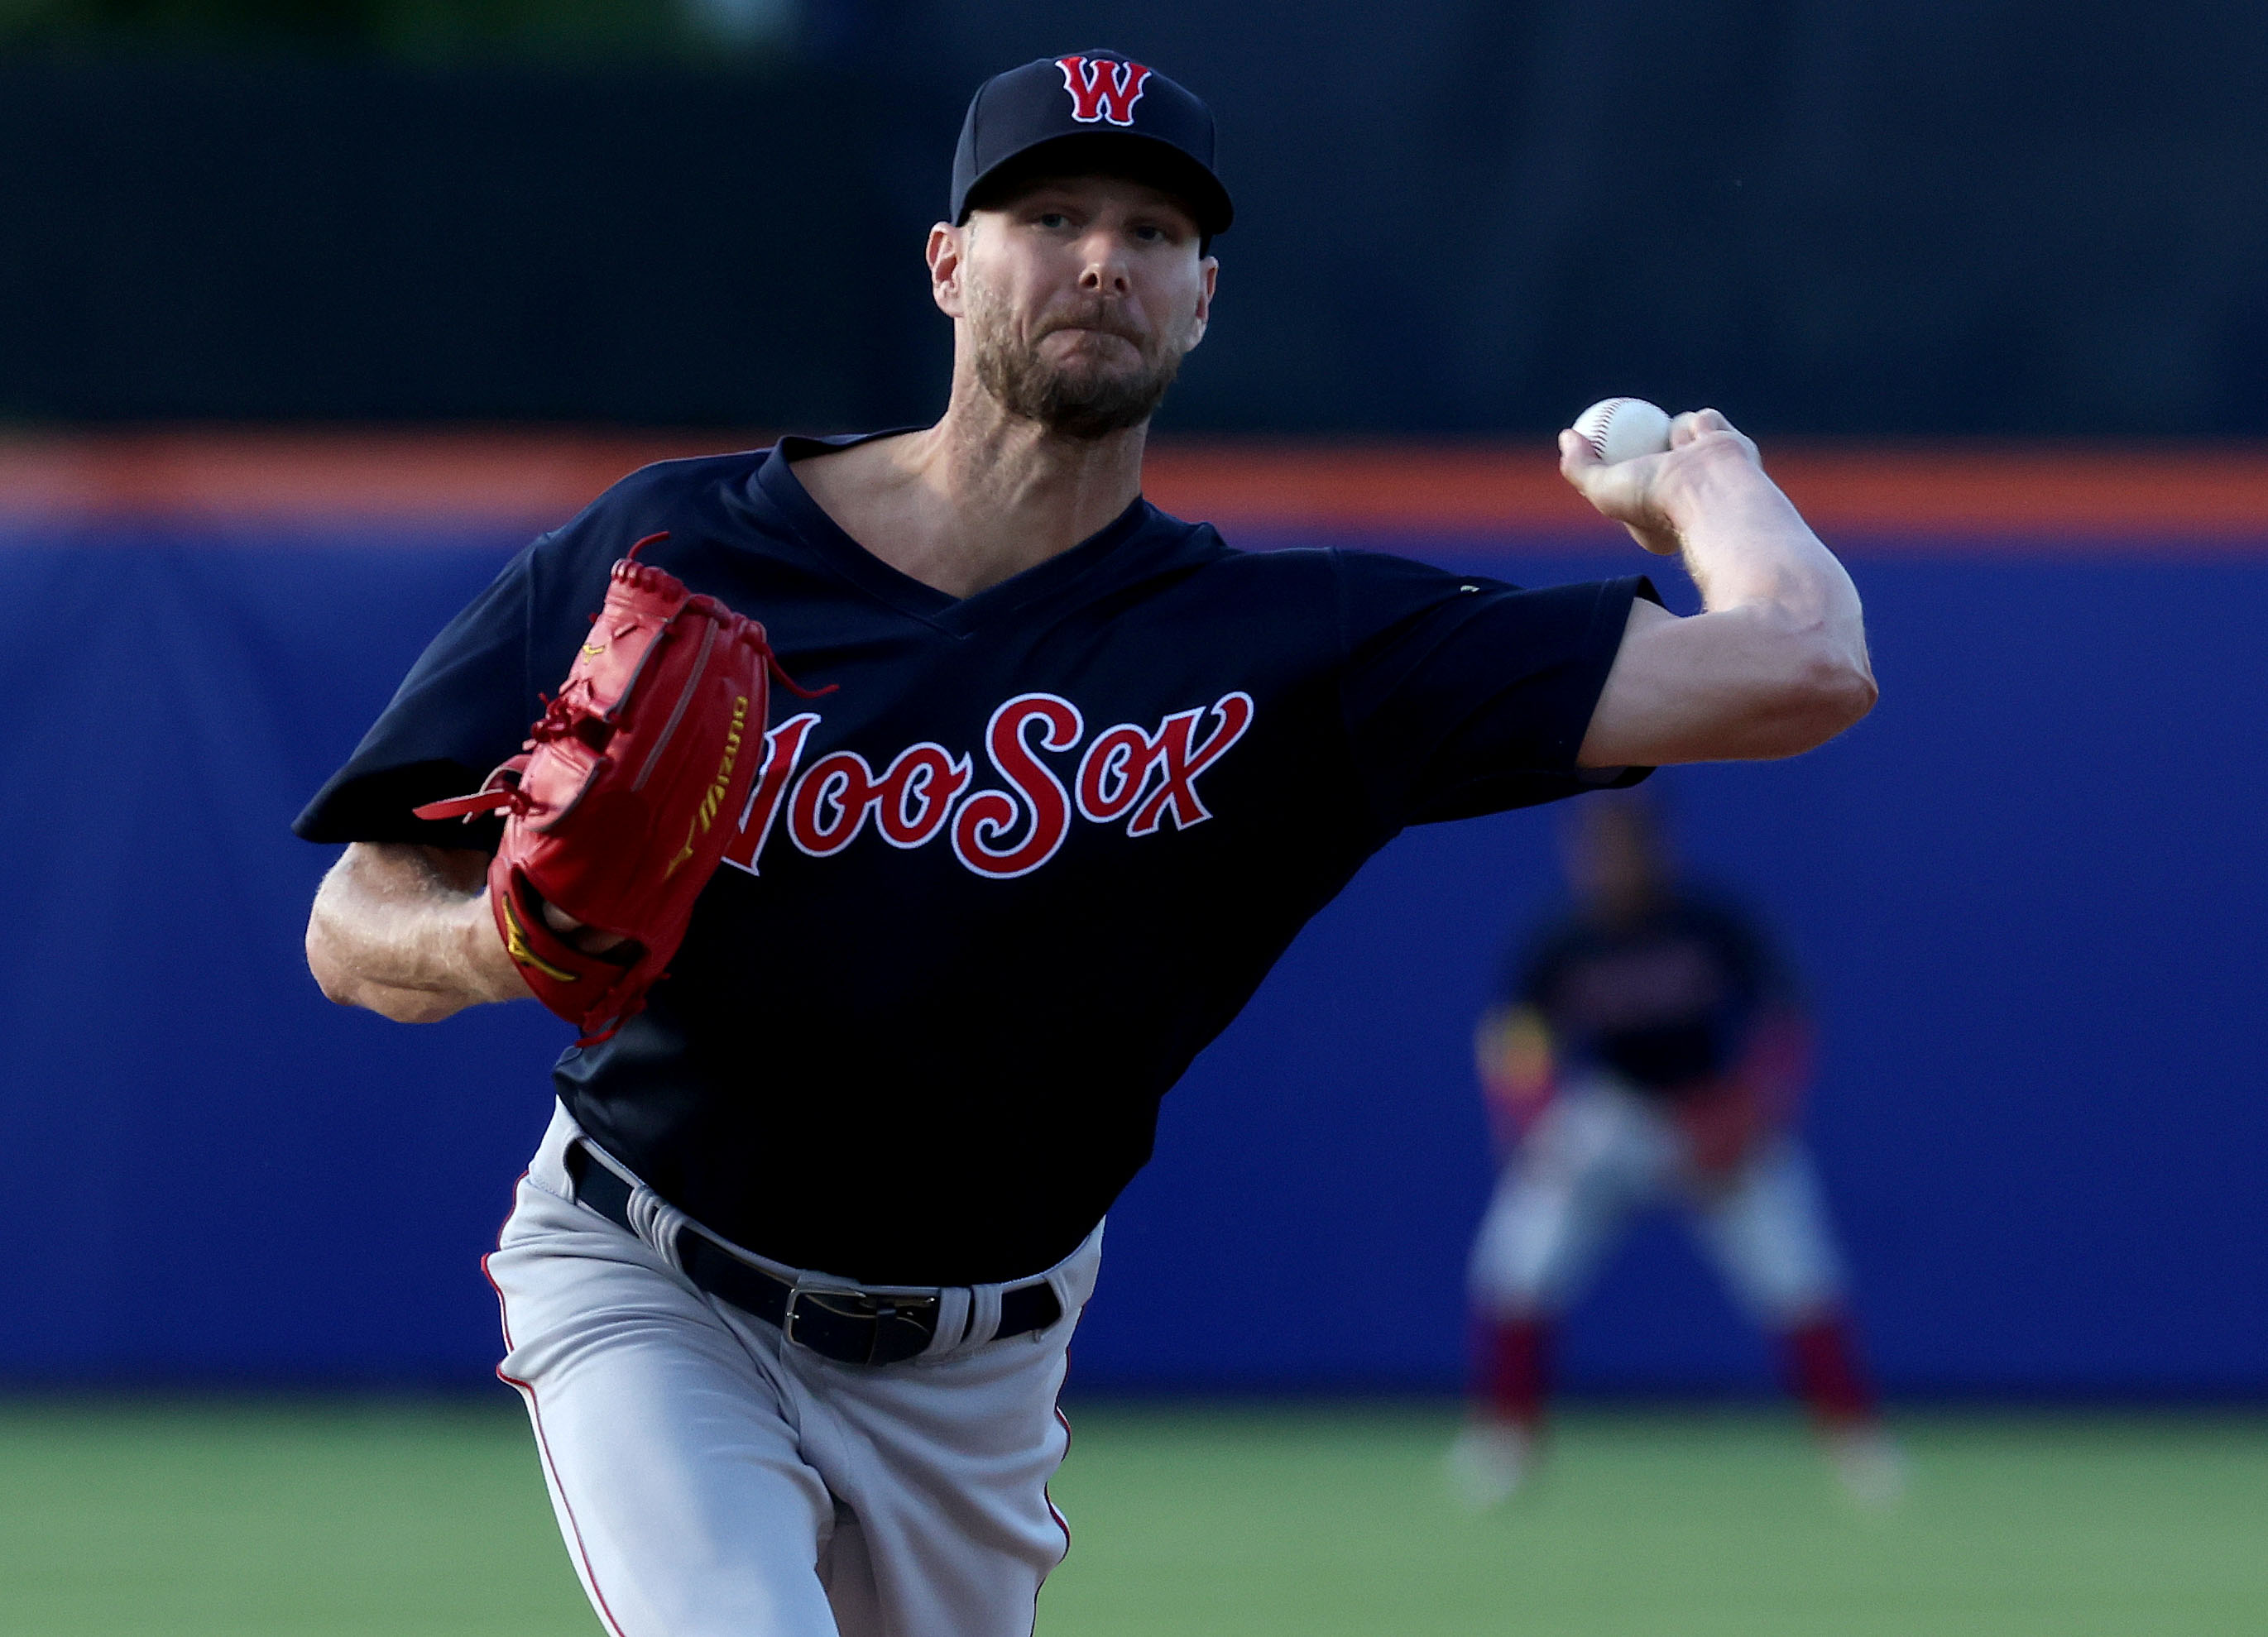 Red Sox pitcher Chris Sale throws five scoreless innings in 2022 debut